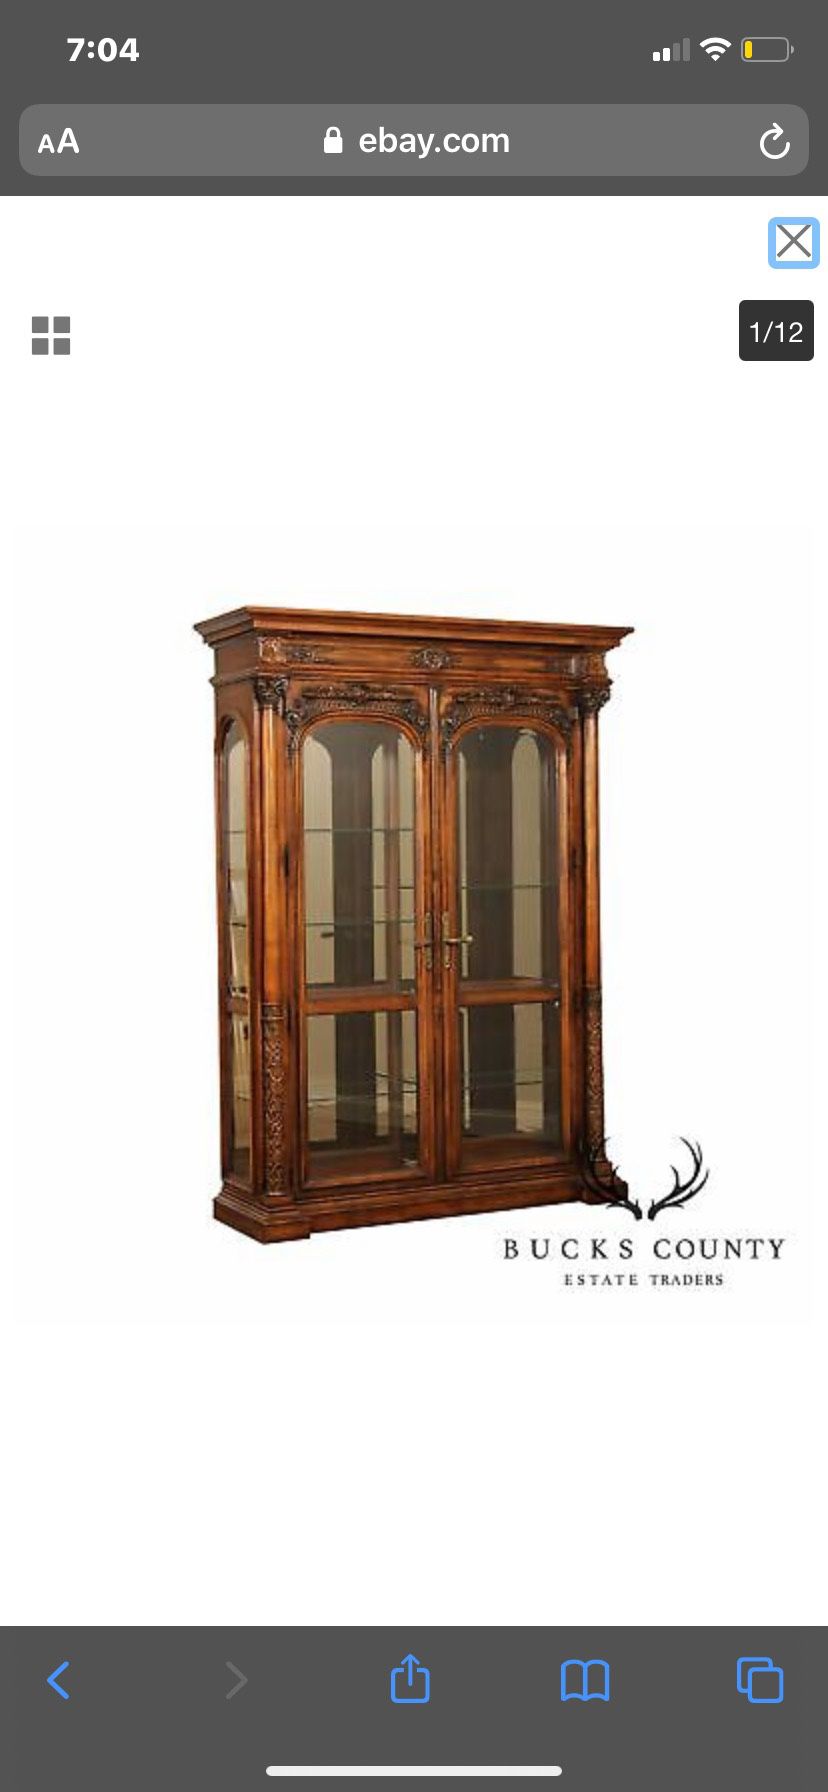 High Quality Large 2 Door Aged Walnut Finish Carved Beveled Glass Display Cabinet with Thick Glass Shelves, Lighted Interior